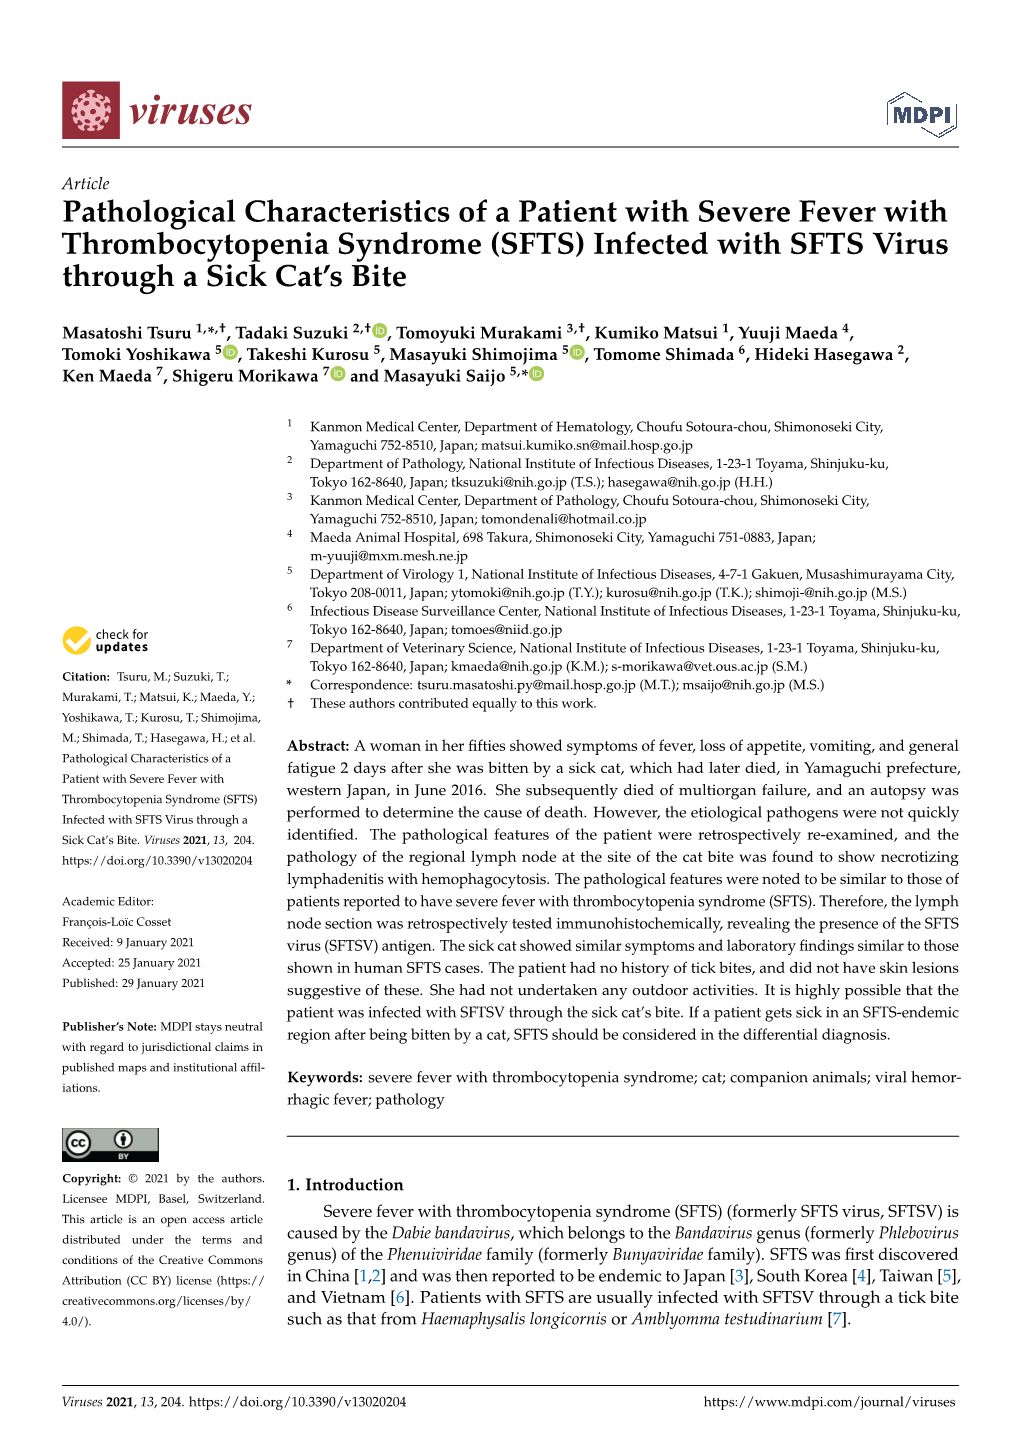 Pathological Characteristics of a Patient with Severe Fever with Thrombocytopenia Syndrome (SFTS) Infected with SFTS Virus Through a Sick Cat’S Bite